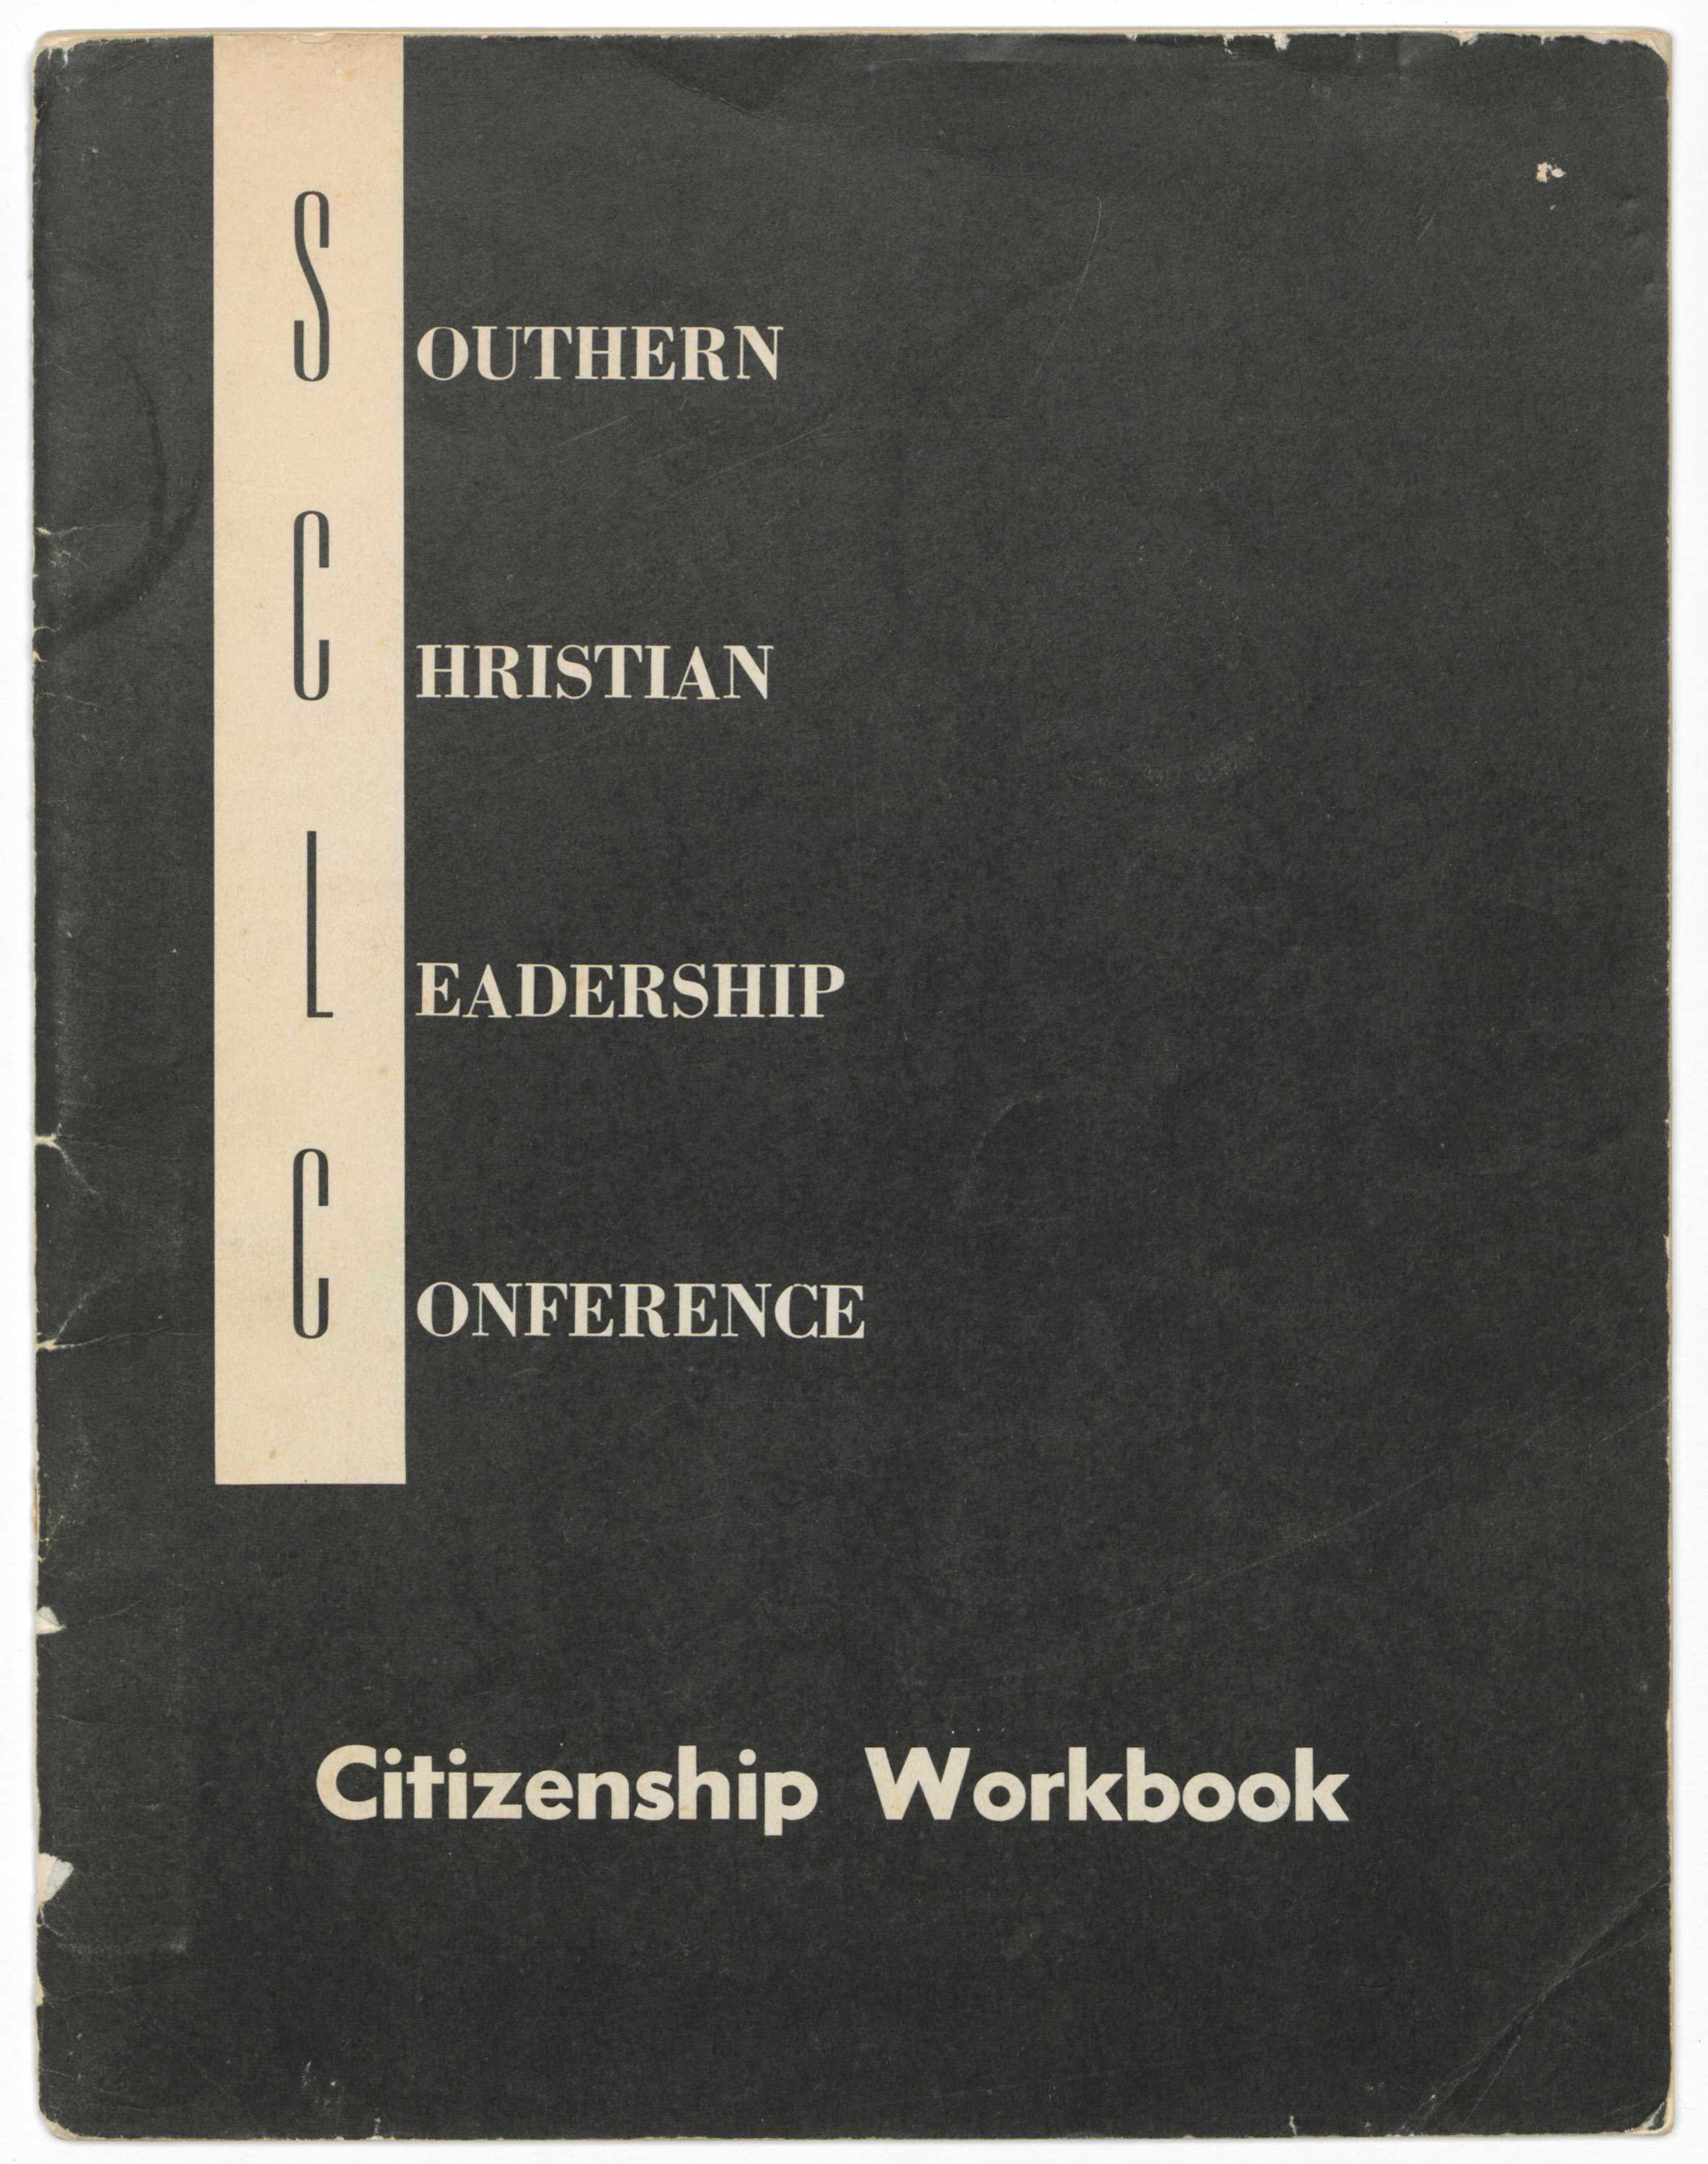 A softback book titled: [Southern Christian Leadership Conference Citizenship Workbook]. The front cover is black with a white vertical block that runs down the proper right side from the top. The block contains the initials: [S / C / L / C] stacked in black. To the right of the block, the initials’ corresponding words are lined up in white type. Together they read: [SOUTHERN / CHRISTIAN / LEADERSHIP / CONFERENCE]. At the bottom of the cover, centered, white type reads: [Citizenship Workbook]. The interior pages, thirty-two in total, are off-white paper with black type and black-and-white images throughout. The inside of the front cover contains information about SCLC Leadership, Citizenship Education Program leadership, and Voter Registration Project leadership. An off-white tab is stuck between front cover and first interior page.  The Foreword contains text from Dr. Martin Luther King, Jr. and a black-and-white image of Dr. King, Dr. C. O. Simpkins and Robert F. Kennedy. There is an envelope adhered between the last interior page and back cover. The back cover has a white rectangular box, centered, with black type that reads: [This book belongs to:]. The rest of the box contains fill in the blanks that include: [Name / Address / City   County / State]. Handwritten in pencil in the "Name" blank is: [Kitt].